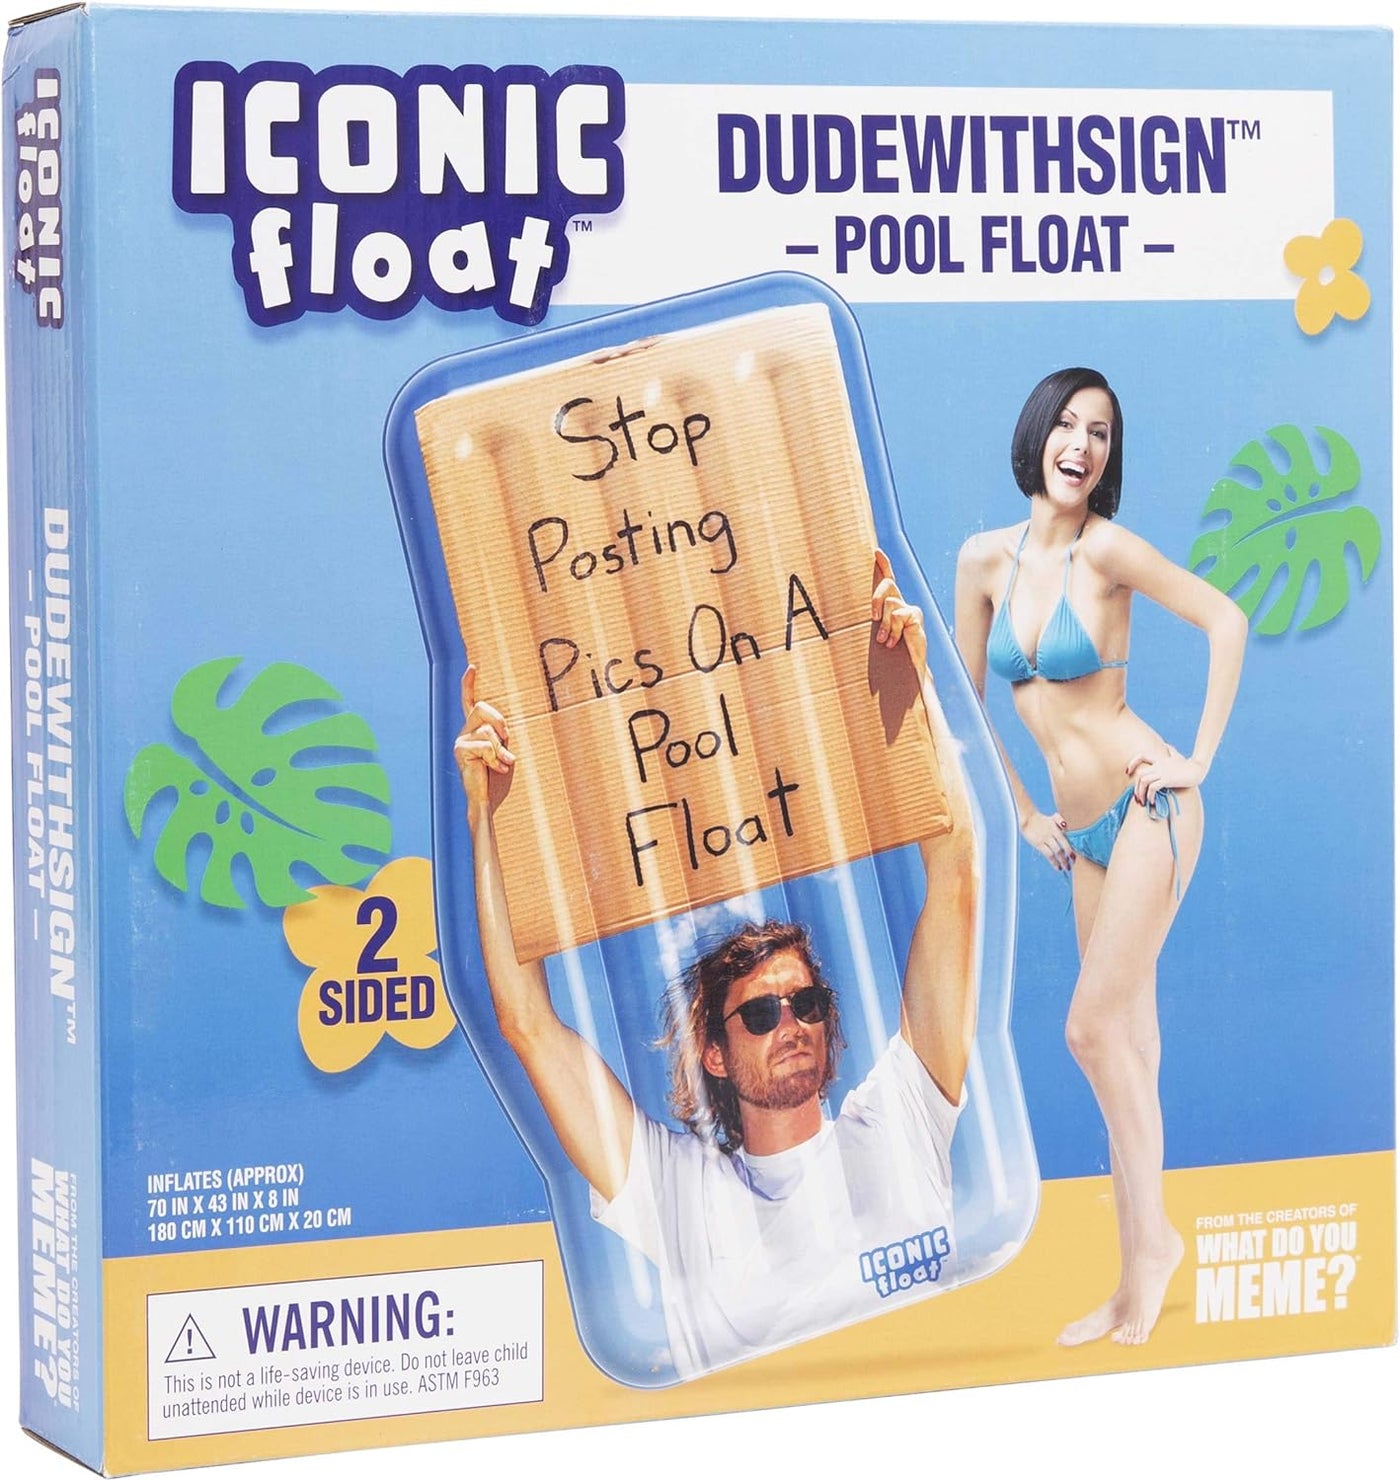 Dude With Sign Pool Float